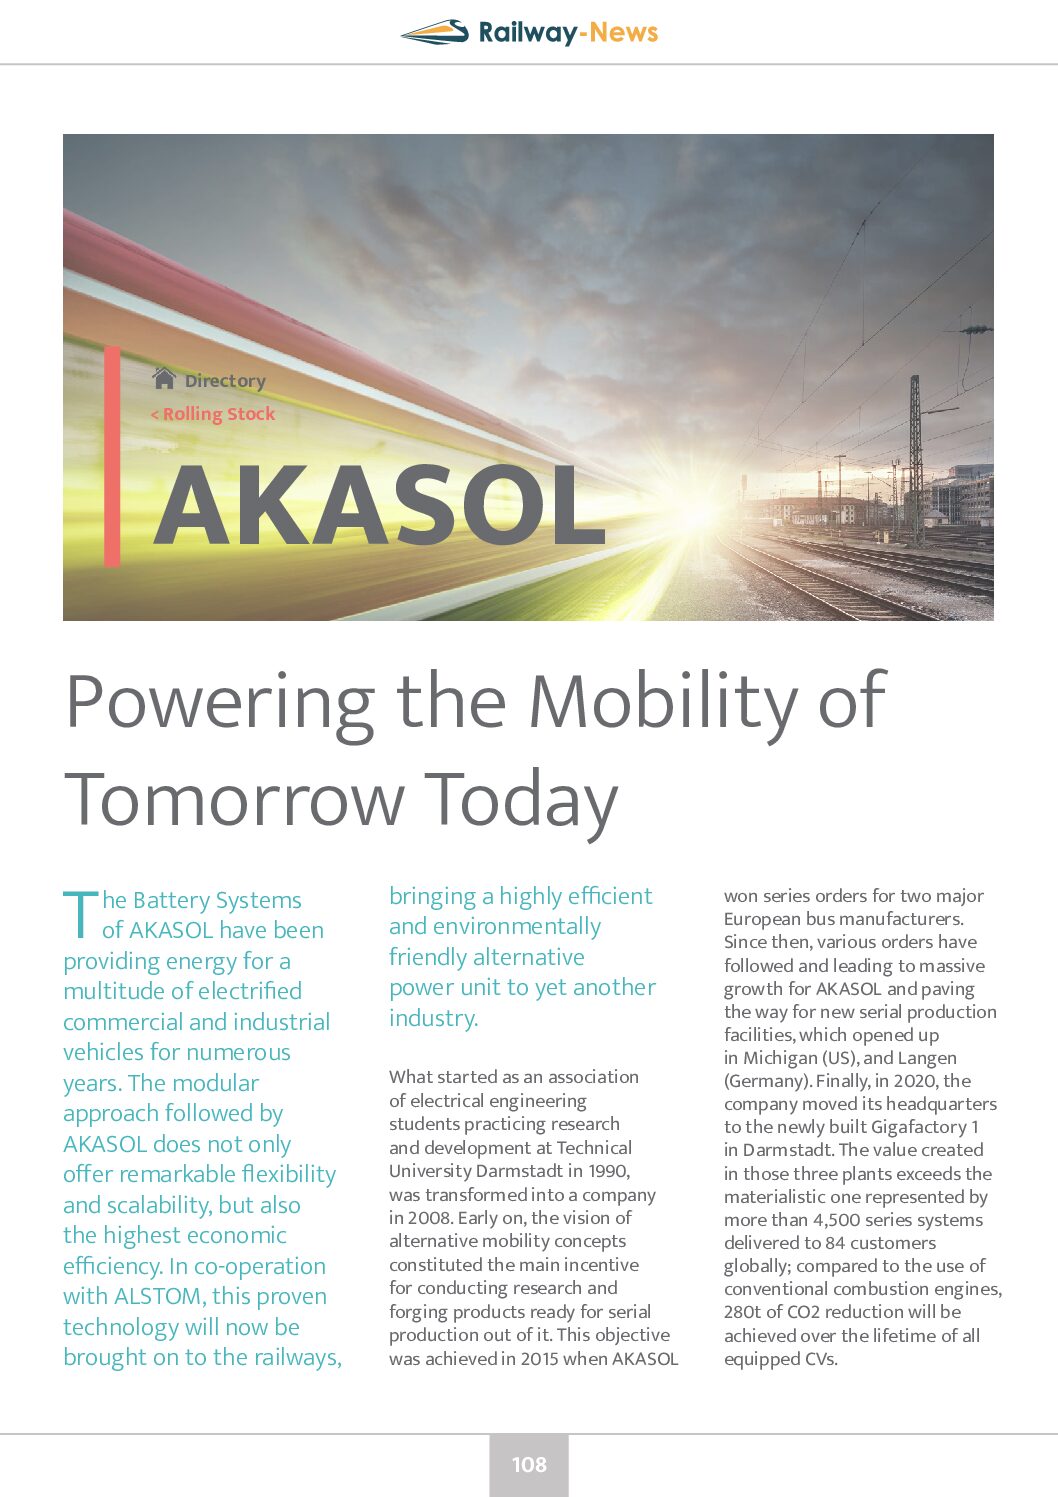 Powering the Mobility of Tomorrow Today